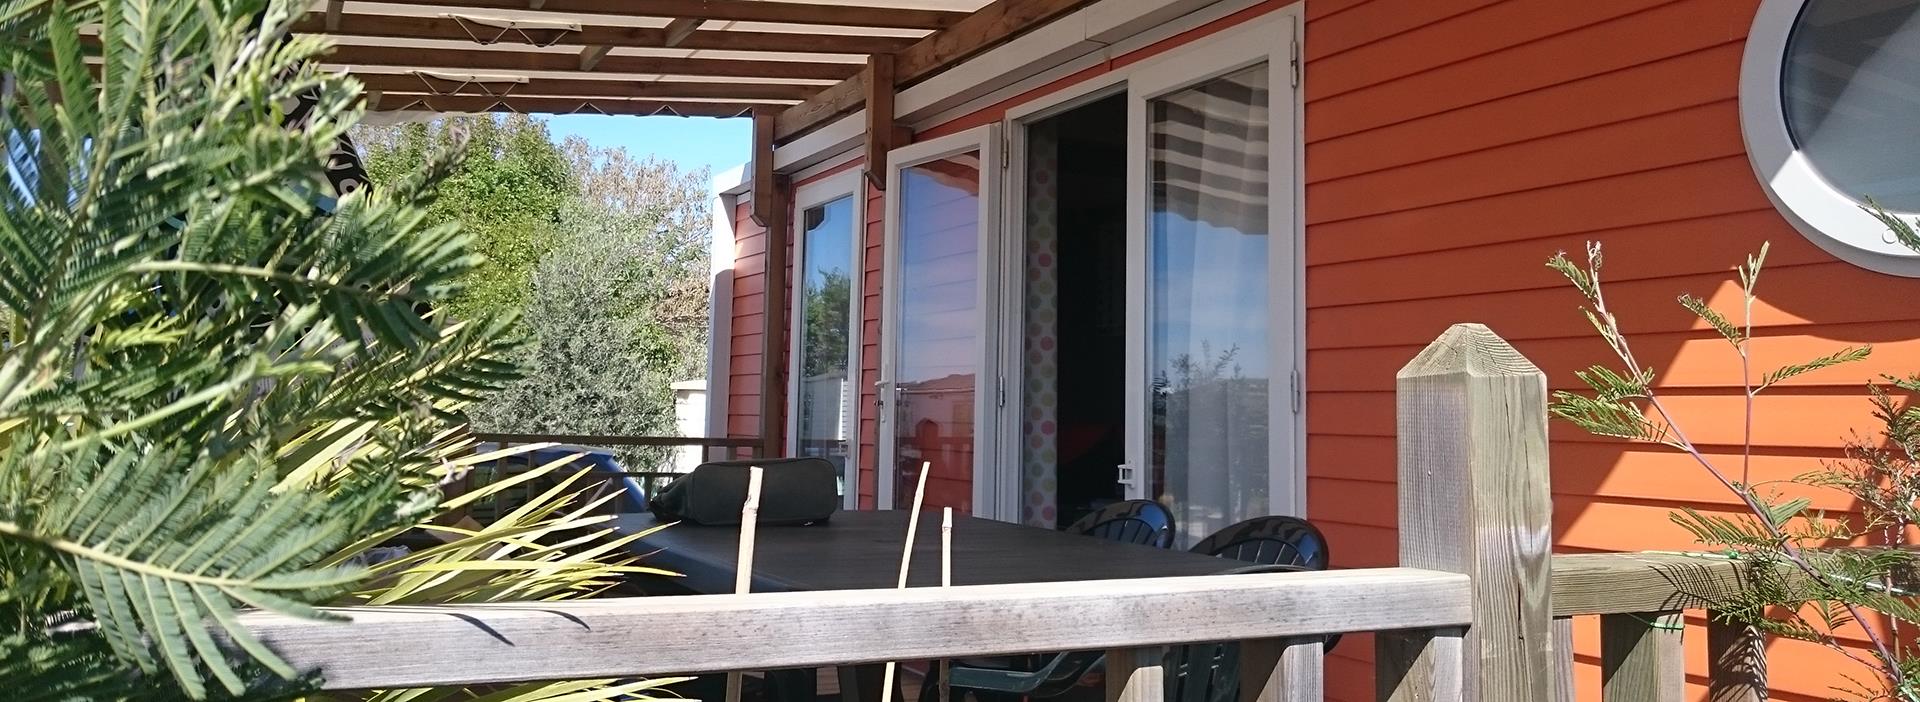 Outside view of the Tendance 4 persons mobile home, for rent at camping Les Amandiers in the Hérault